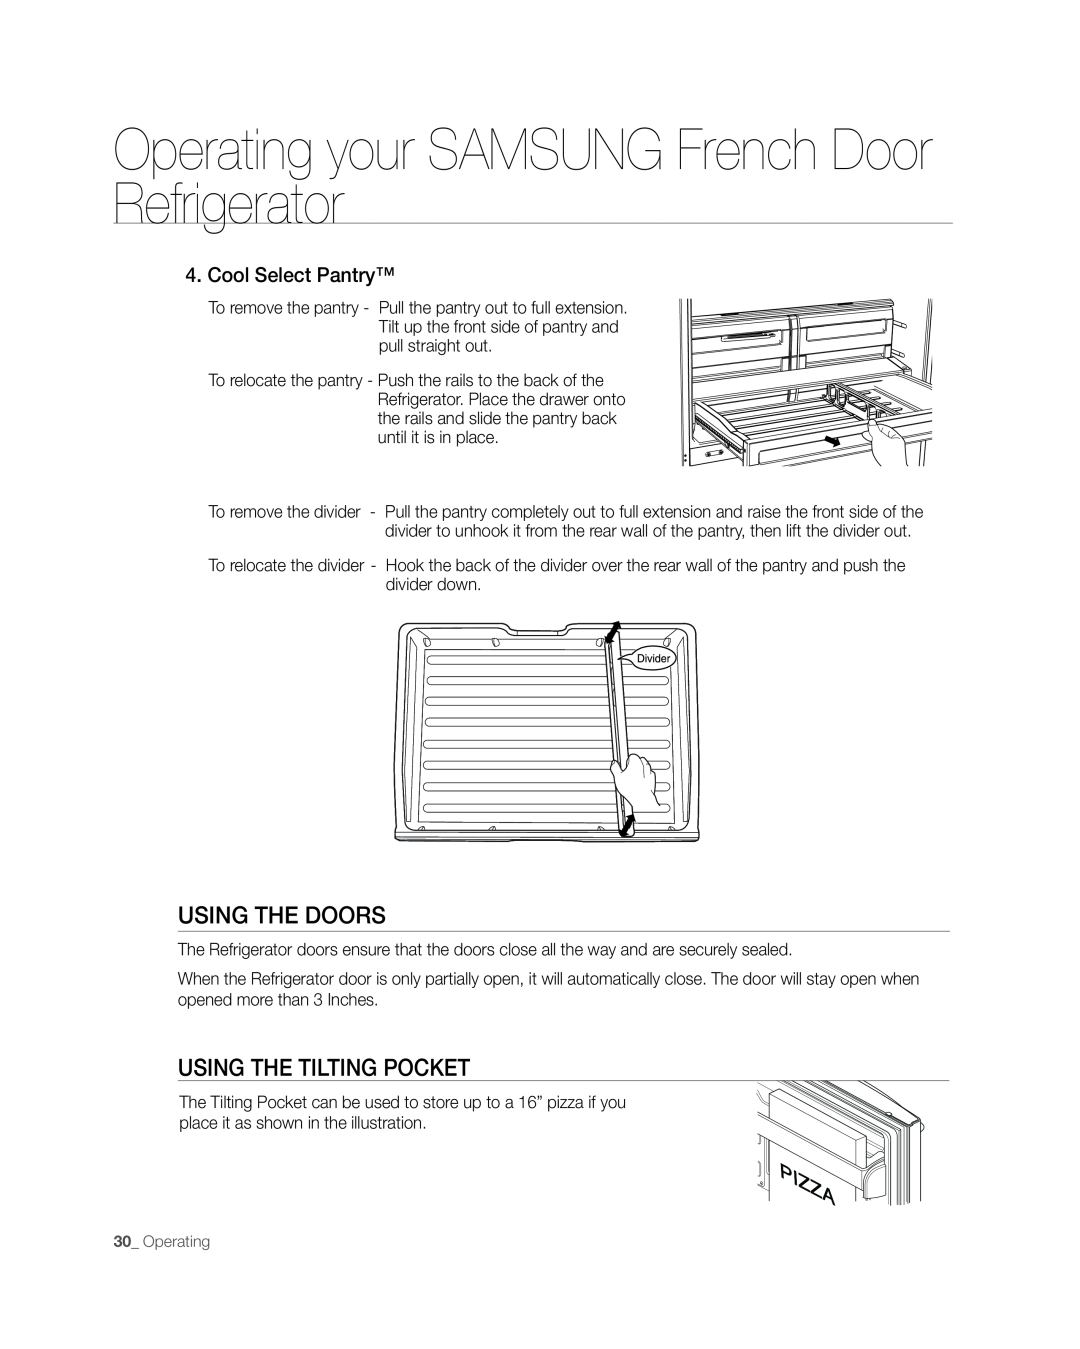 Samsung RFG297AAWP user manual using tHe DooRs, usinG tHE tiLtinG PoCKEt, Operating your SAMSUNG French Door Refrigerator 